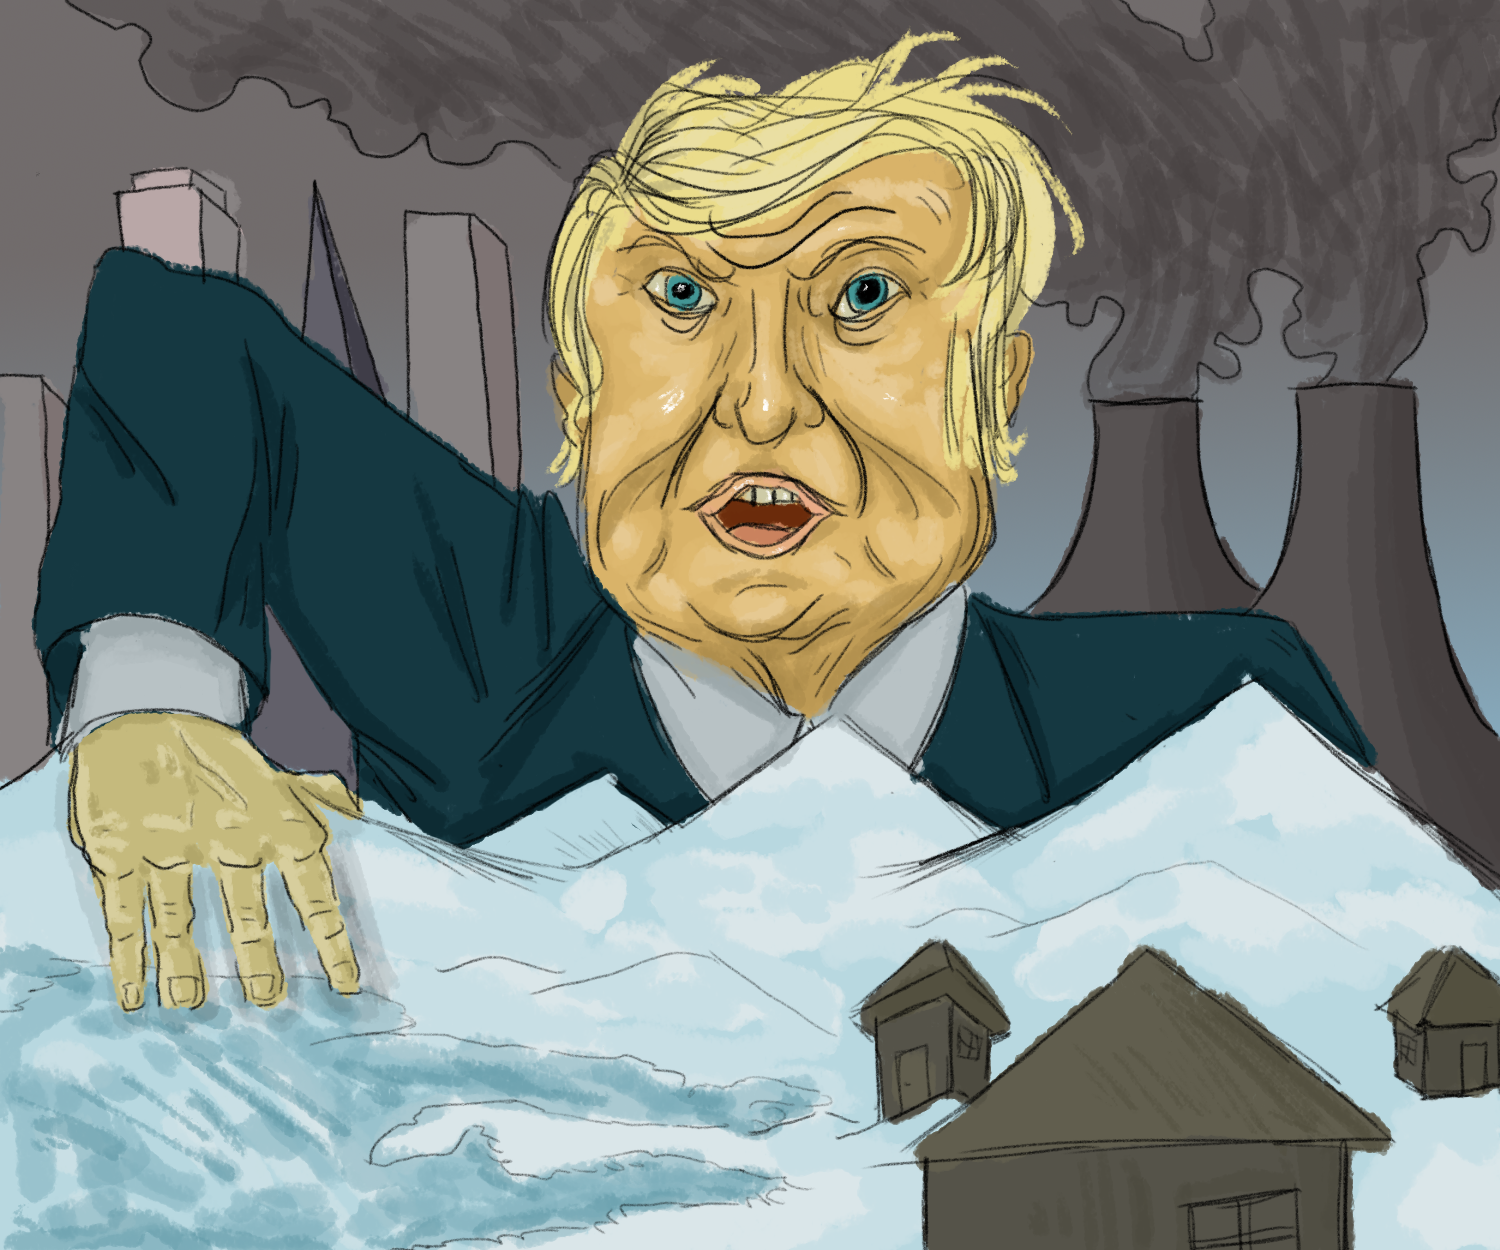 Thumbnail for Trump’s Greenland Proposal: A Loss of Trust During a Climate Crisis